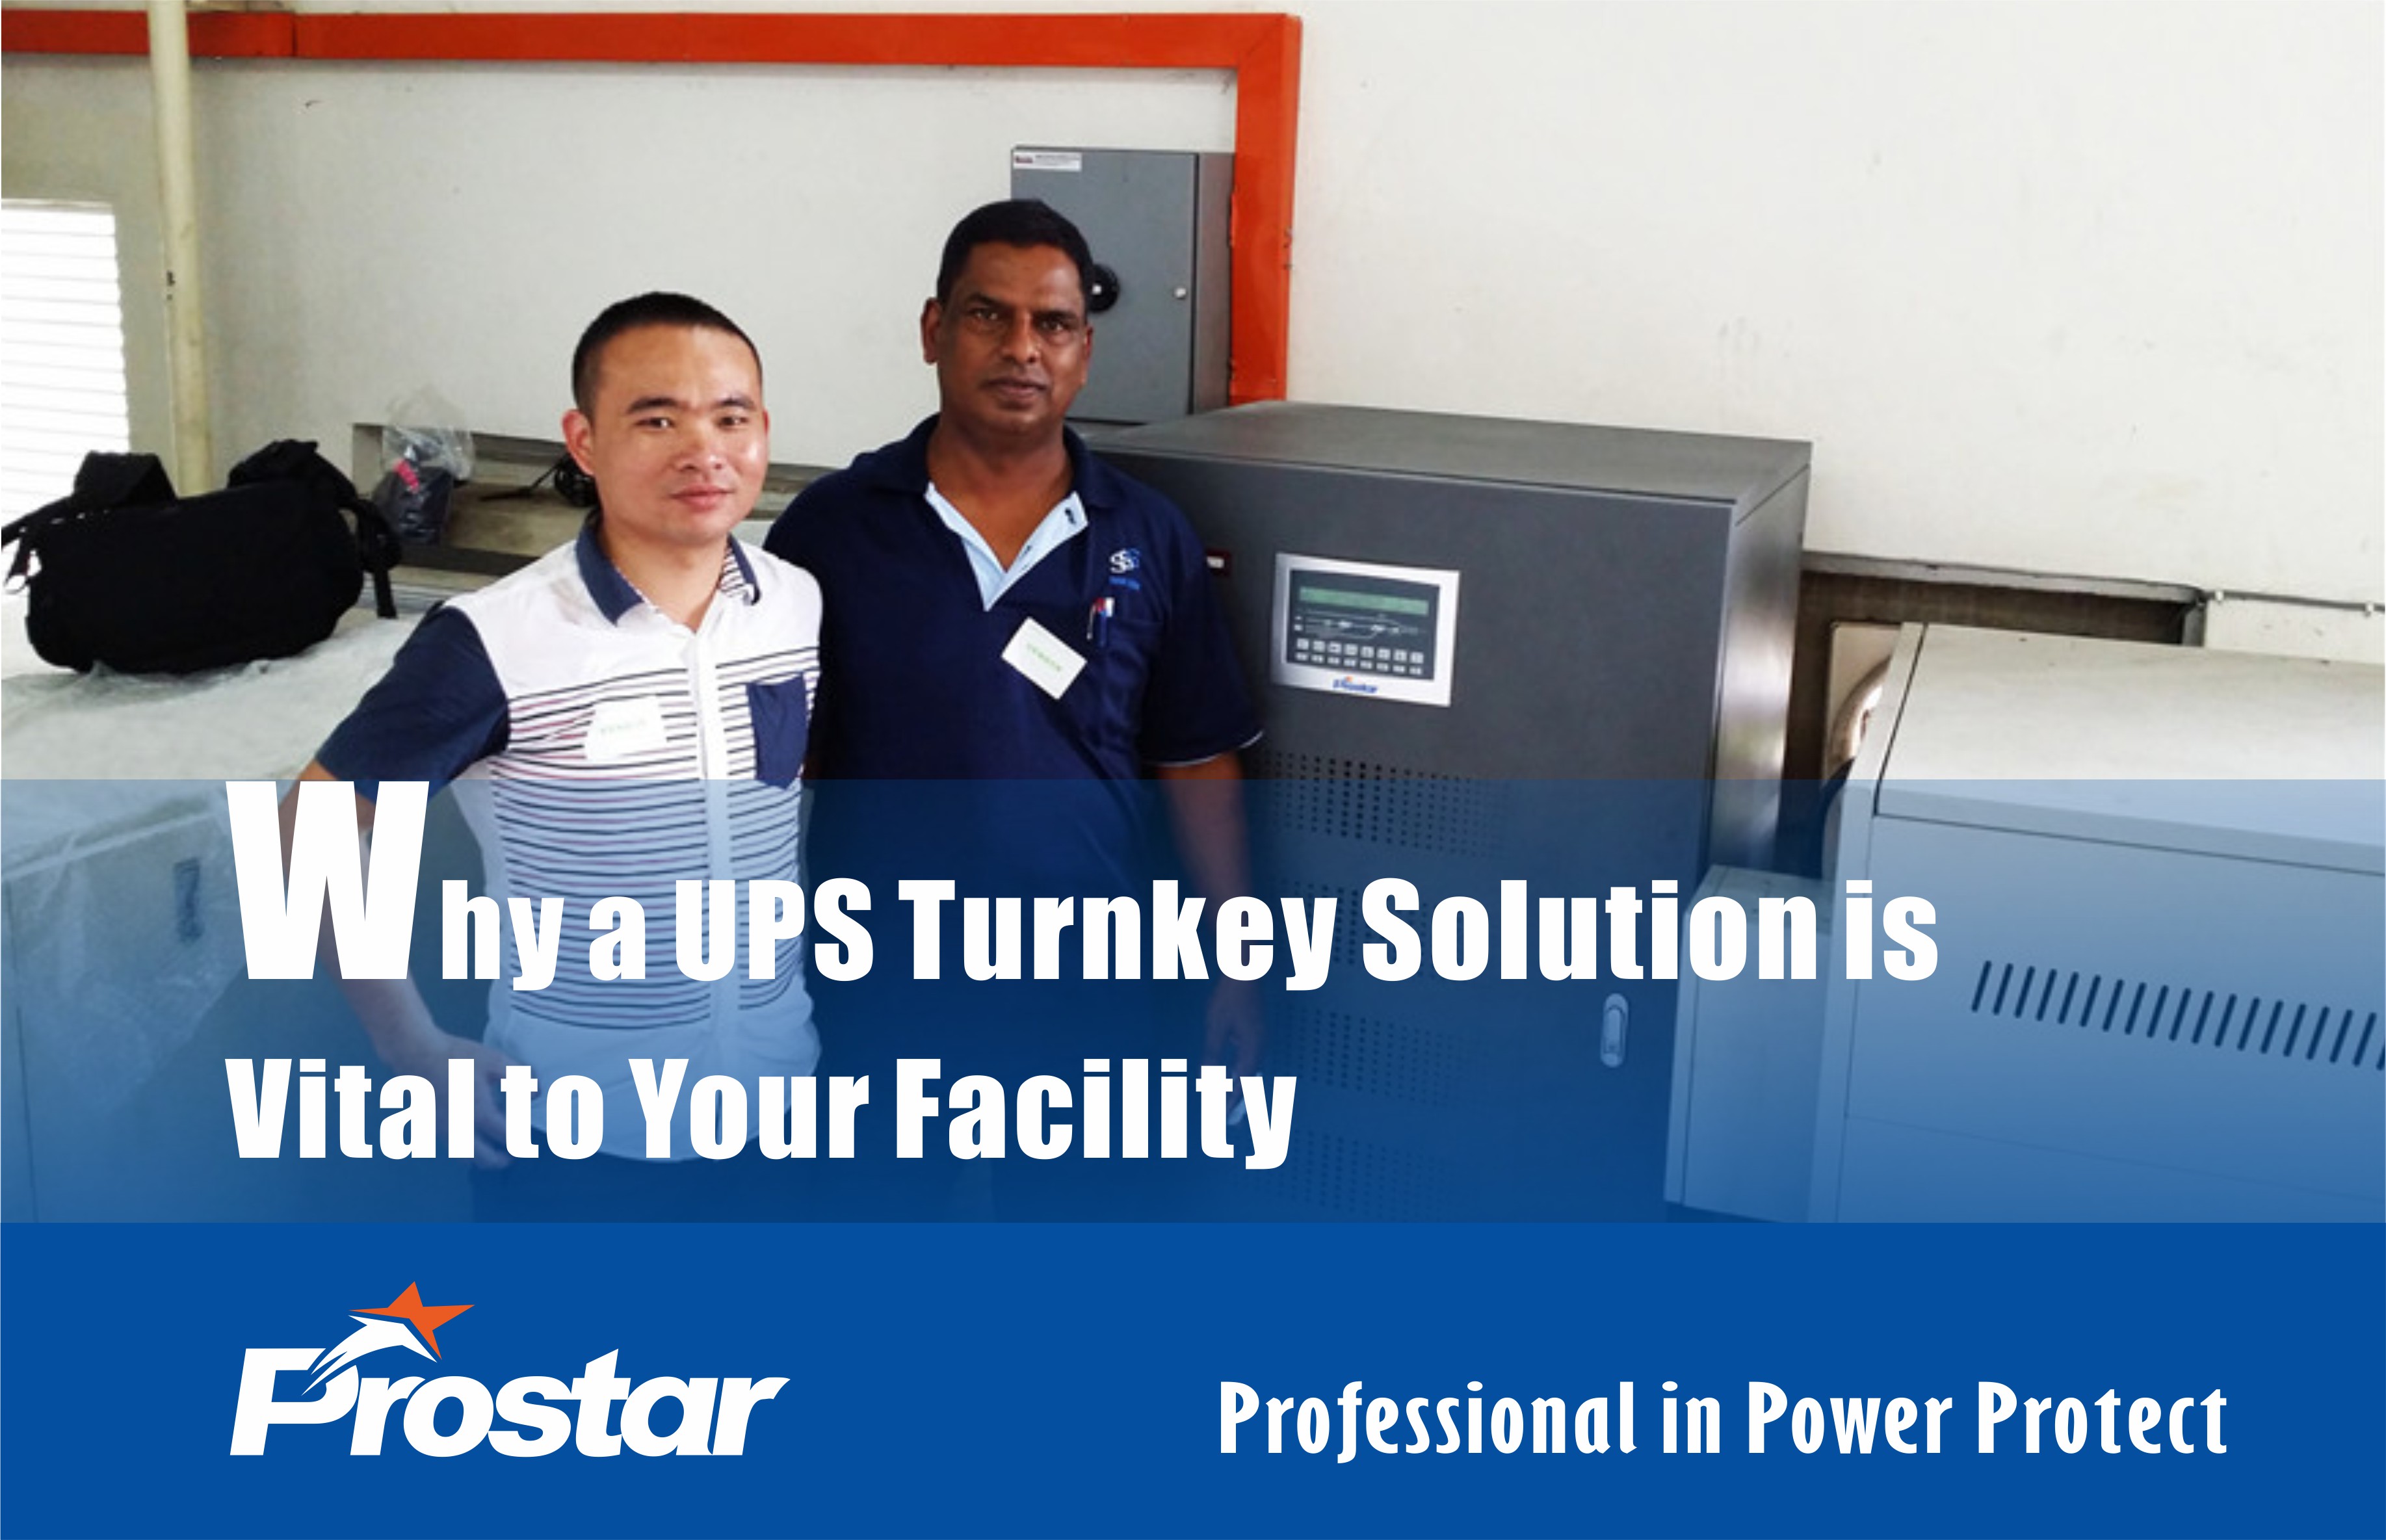 Why a UPS Turnkey Solution is Vital to Your Facility